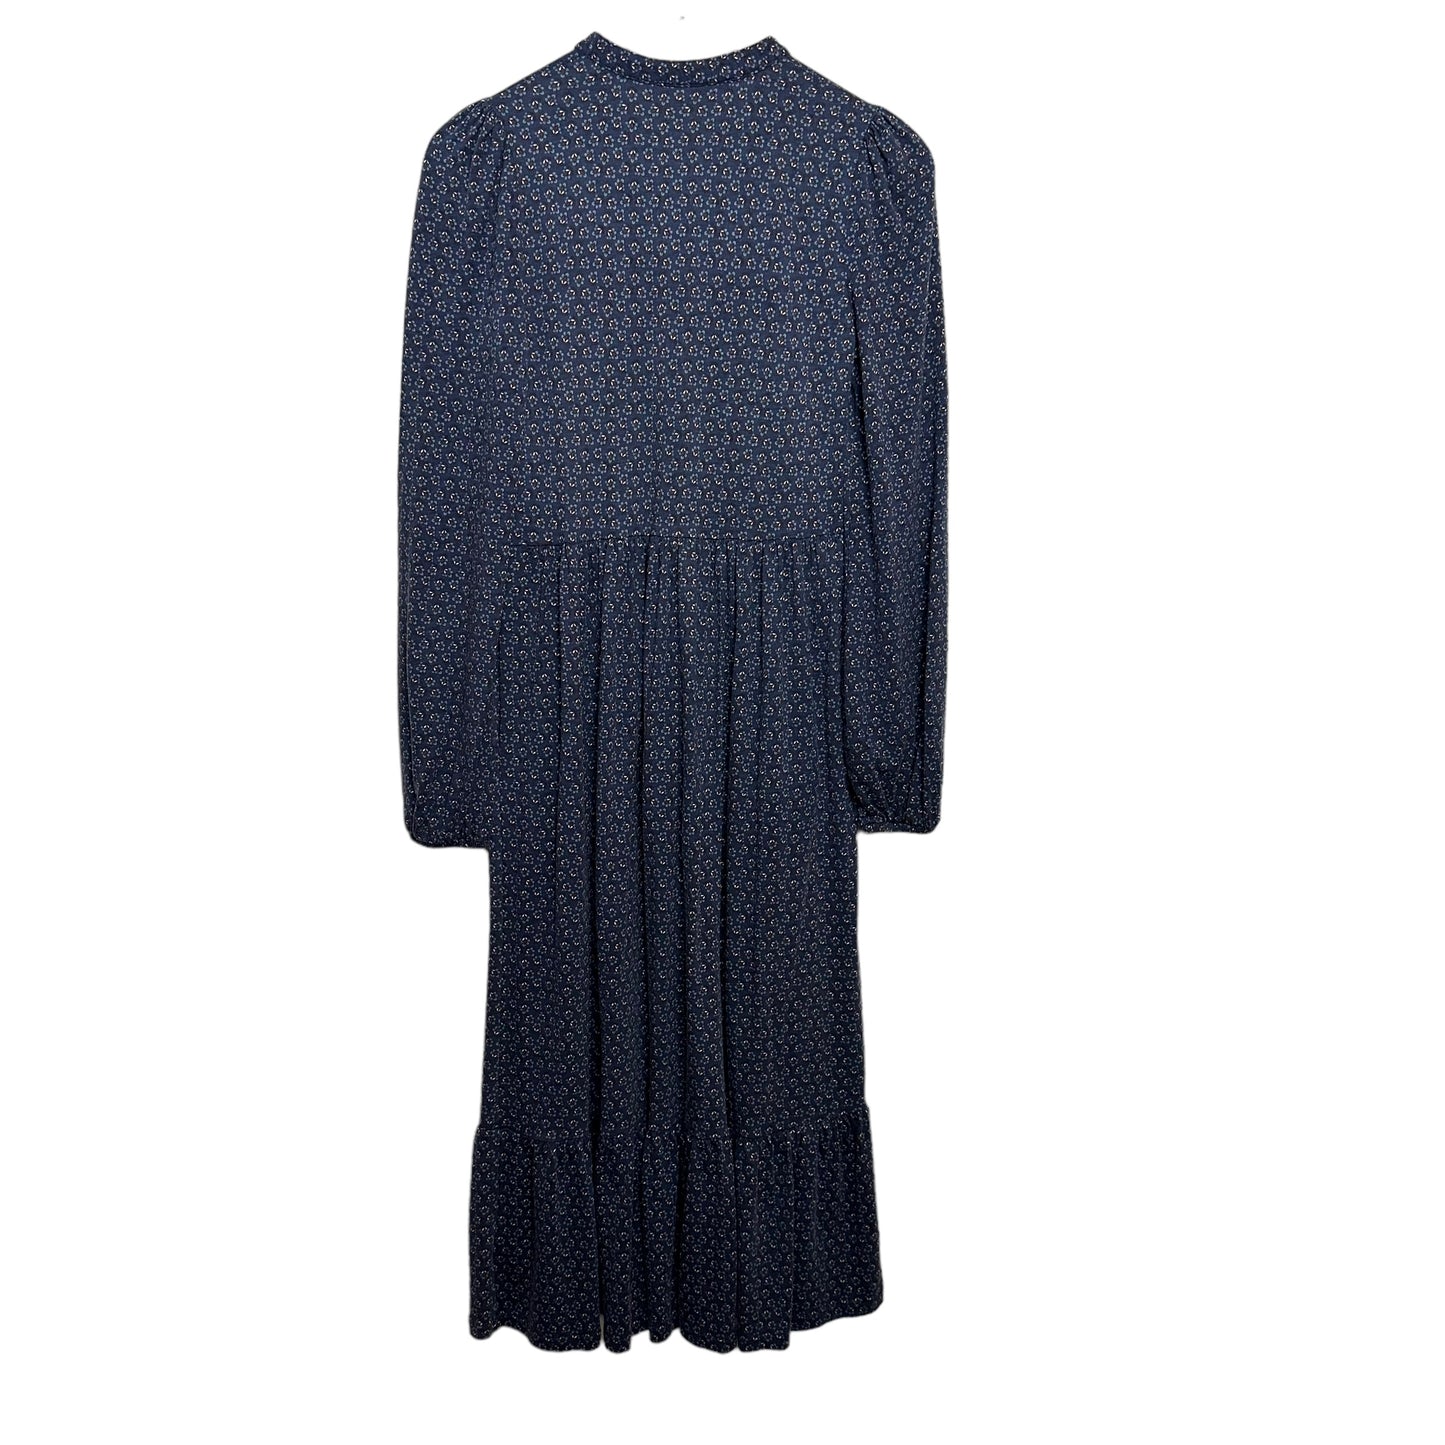 Boden Buttoned Jersey Floral Navy Midi Long Sleeve Dress 2